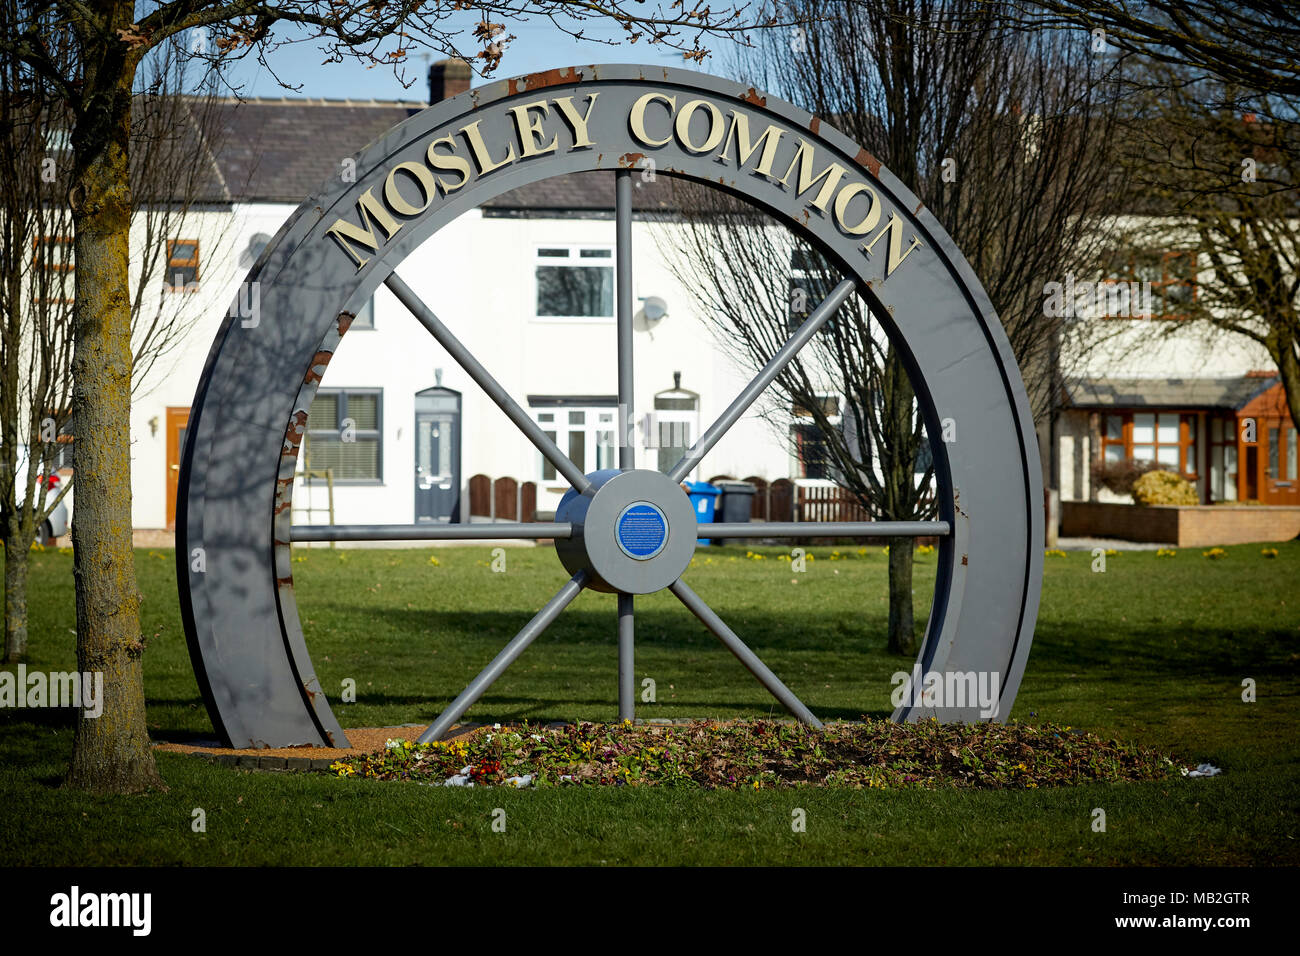 The Mosley Common Wheel, Mining history near Leigh, the village green Greater Manchester, marking the site of Mosley Colliery Stock Photo